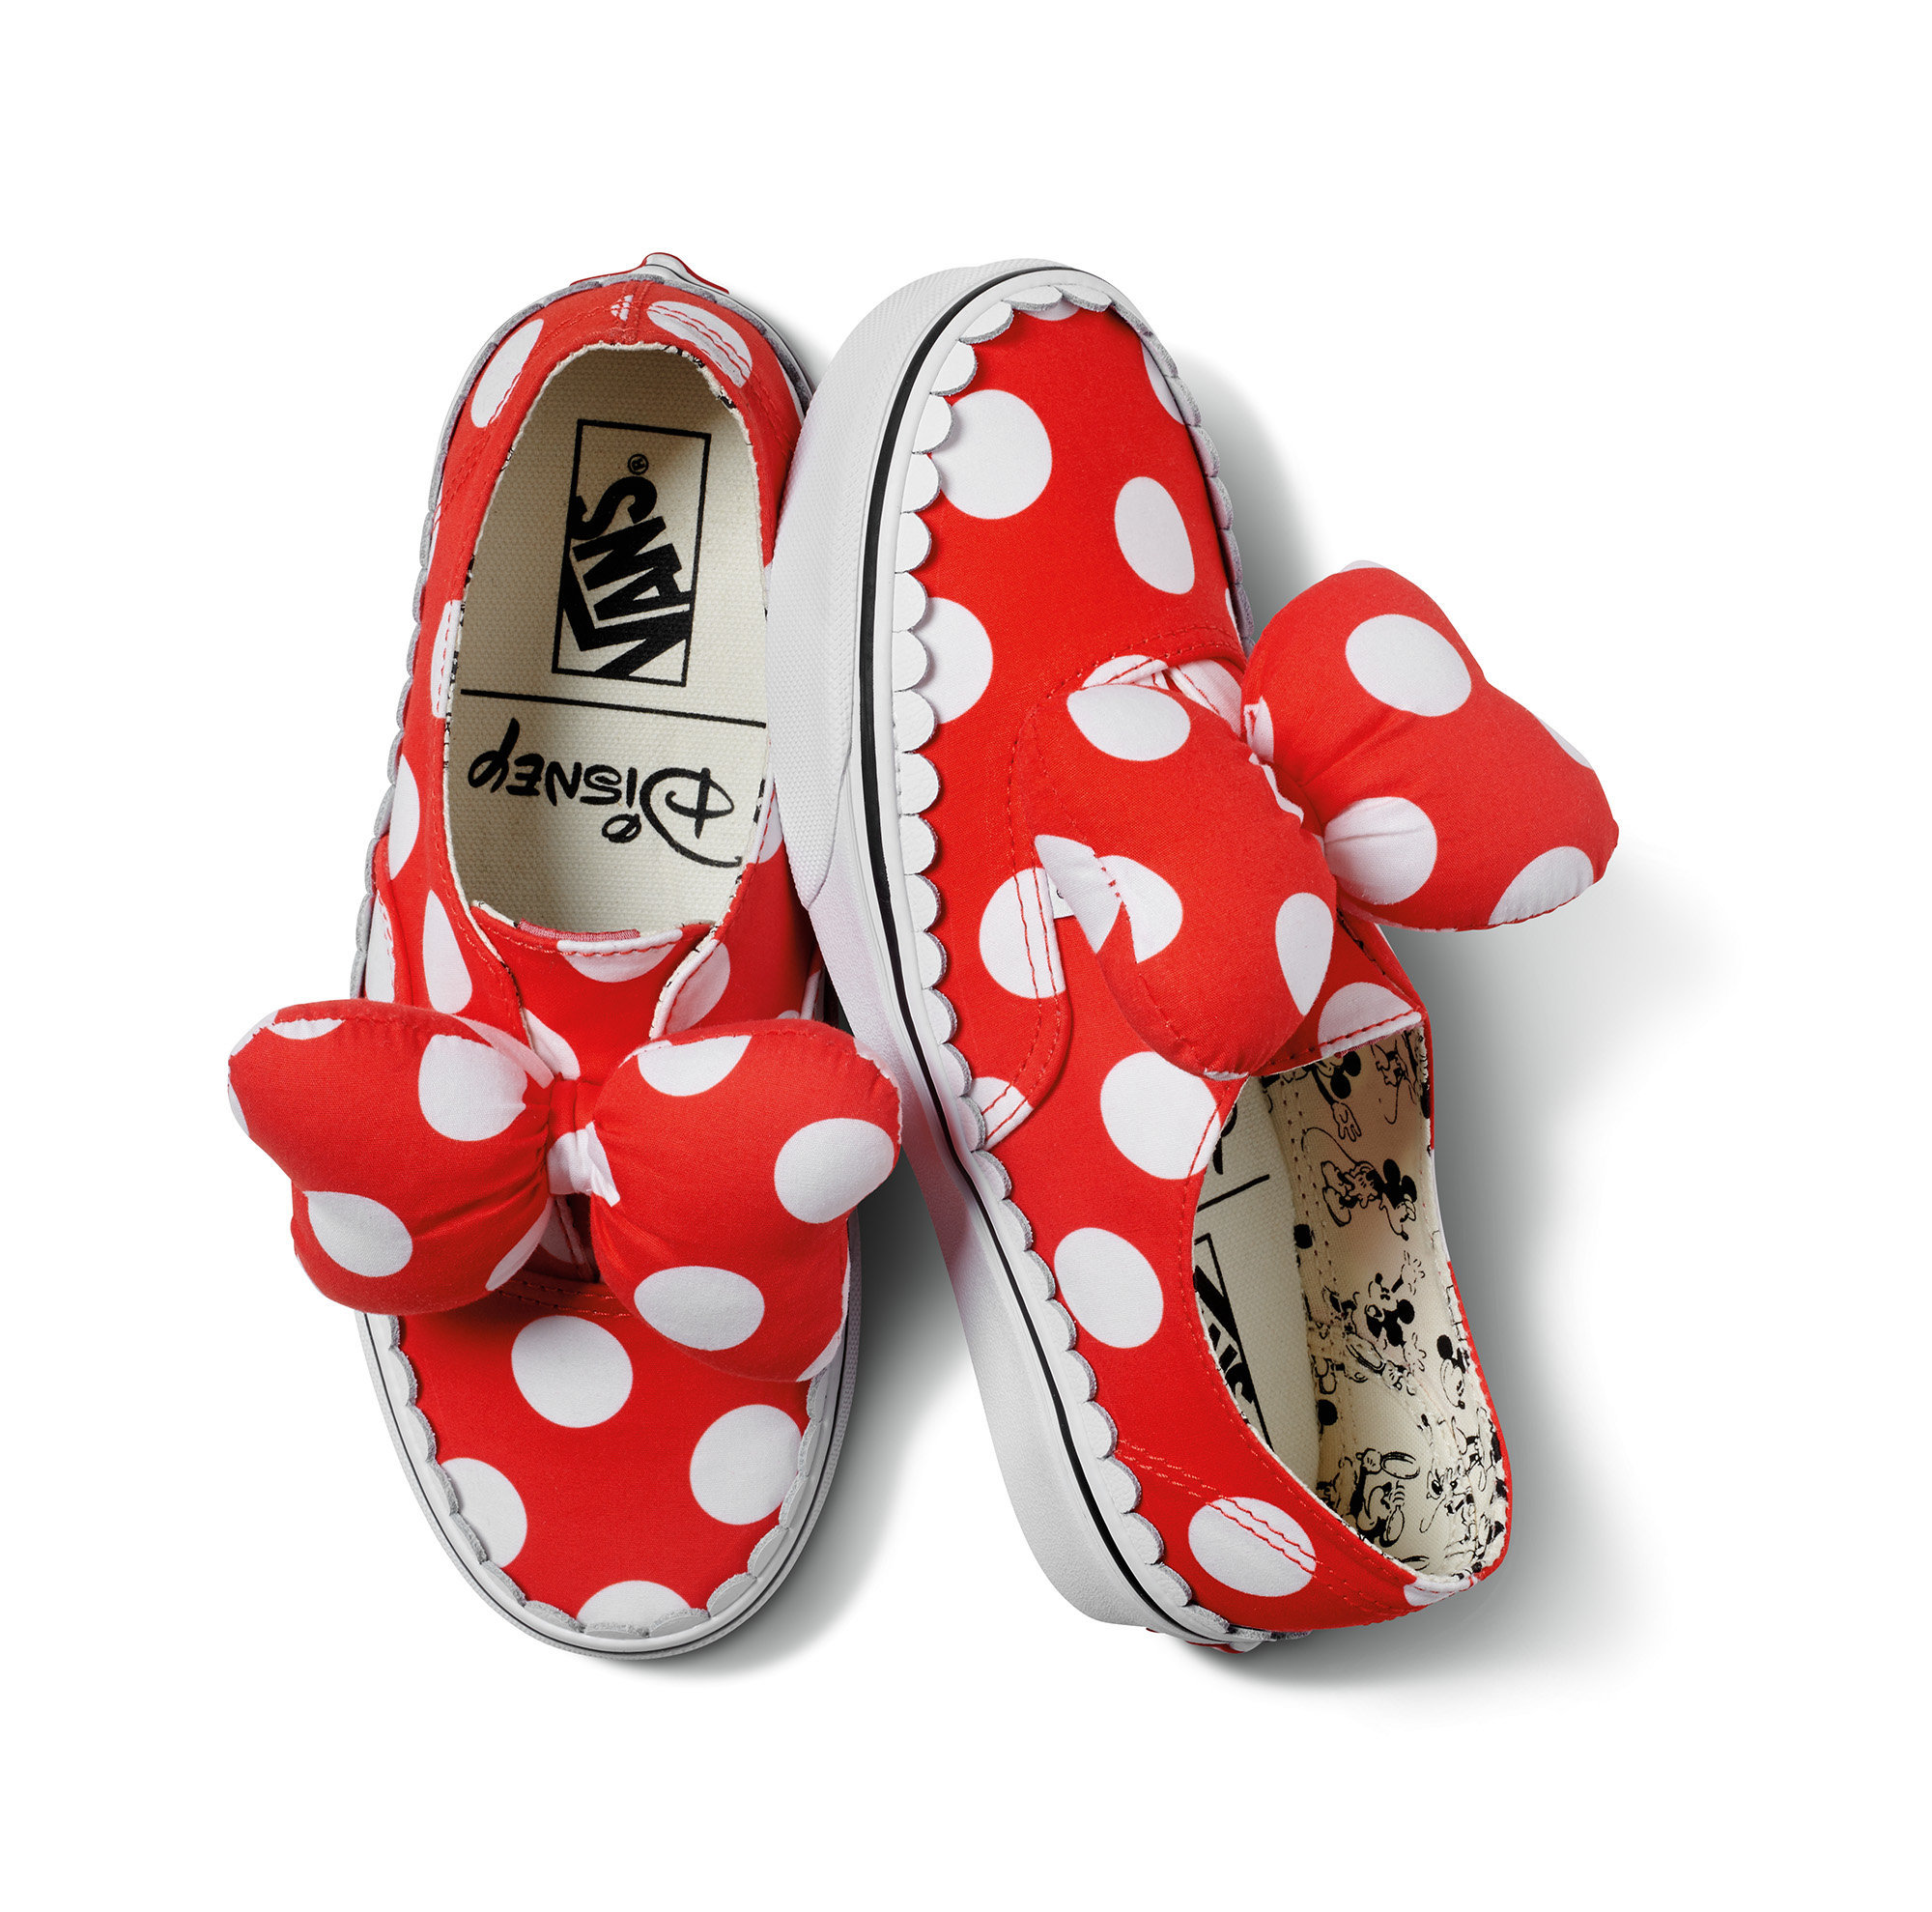 baby vans mickey mouse